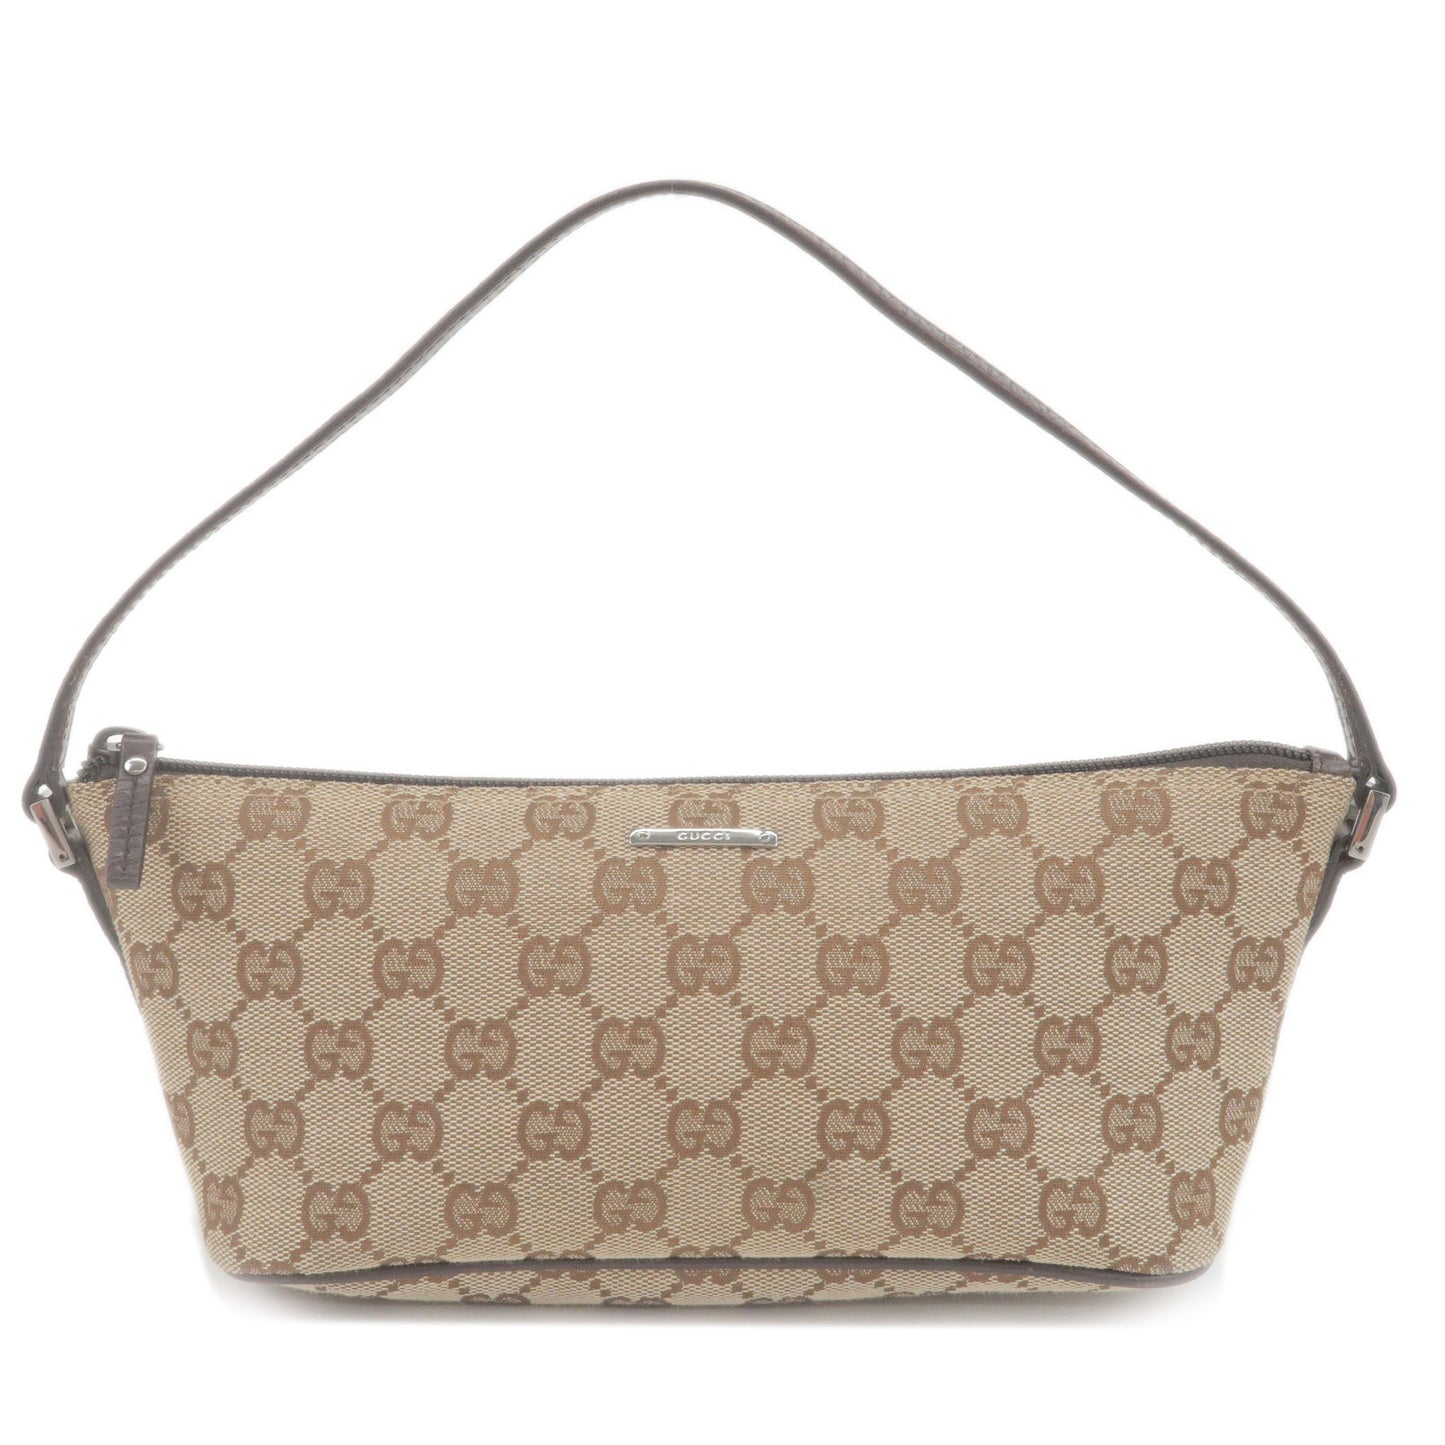 GUCCI-GG-Canvas-Leather-Boat-Bag-Hand-Bag-Beige-Brown-07198